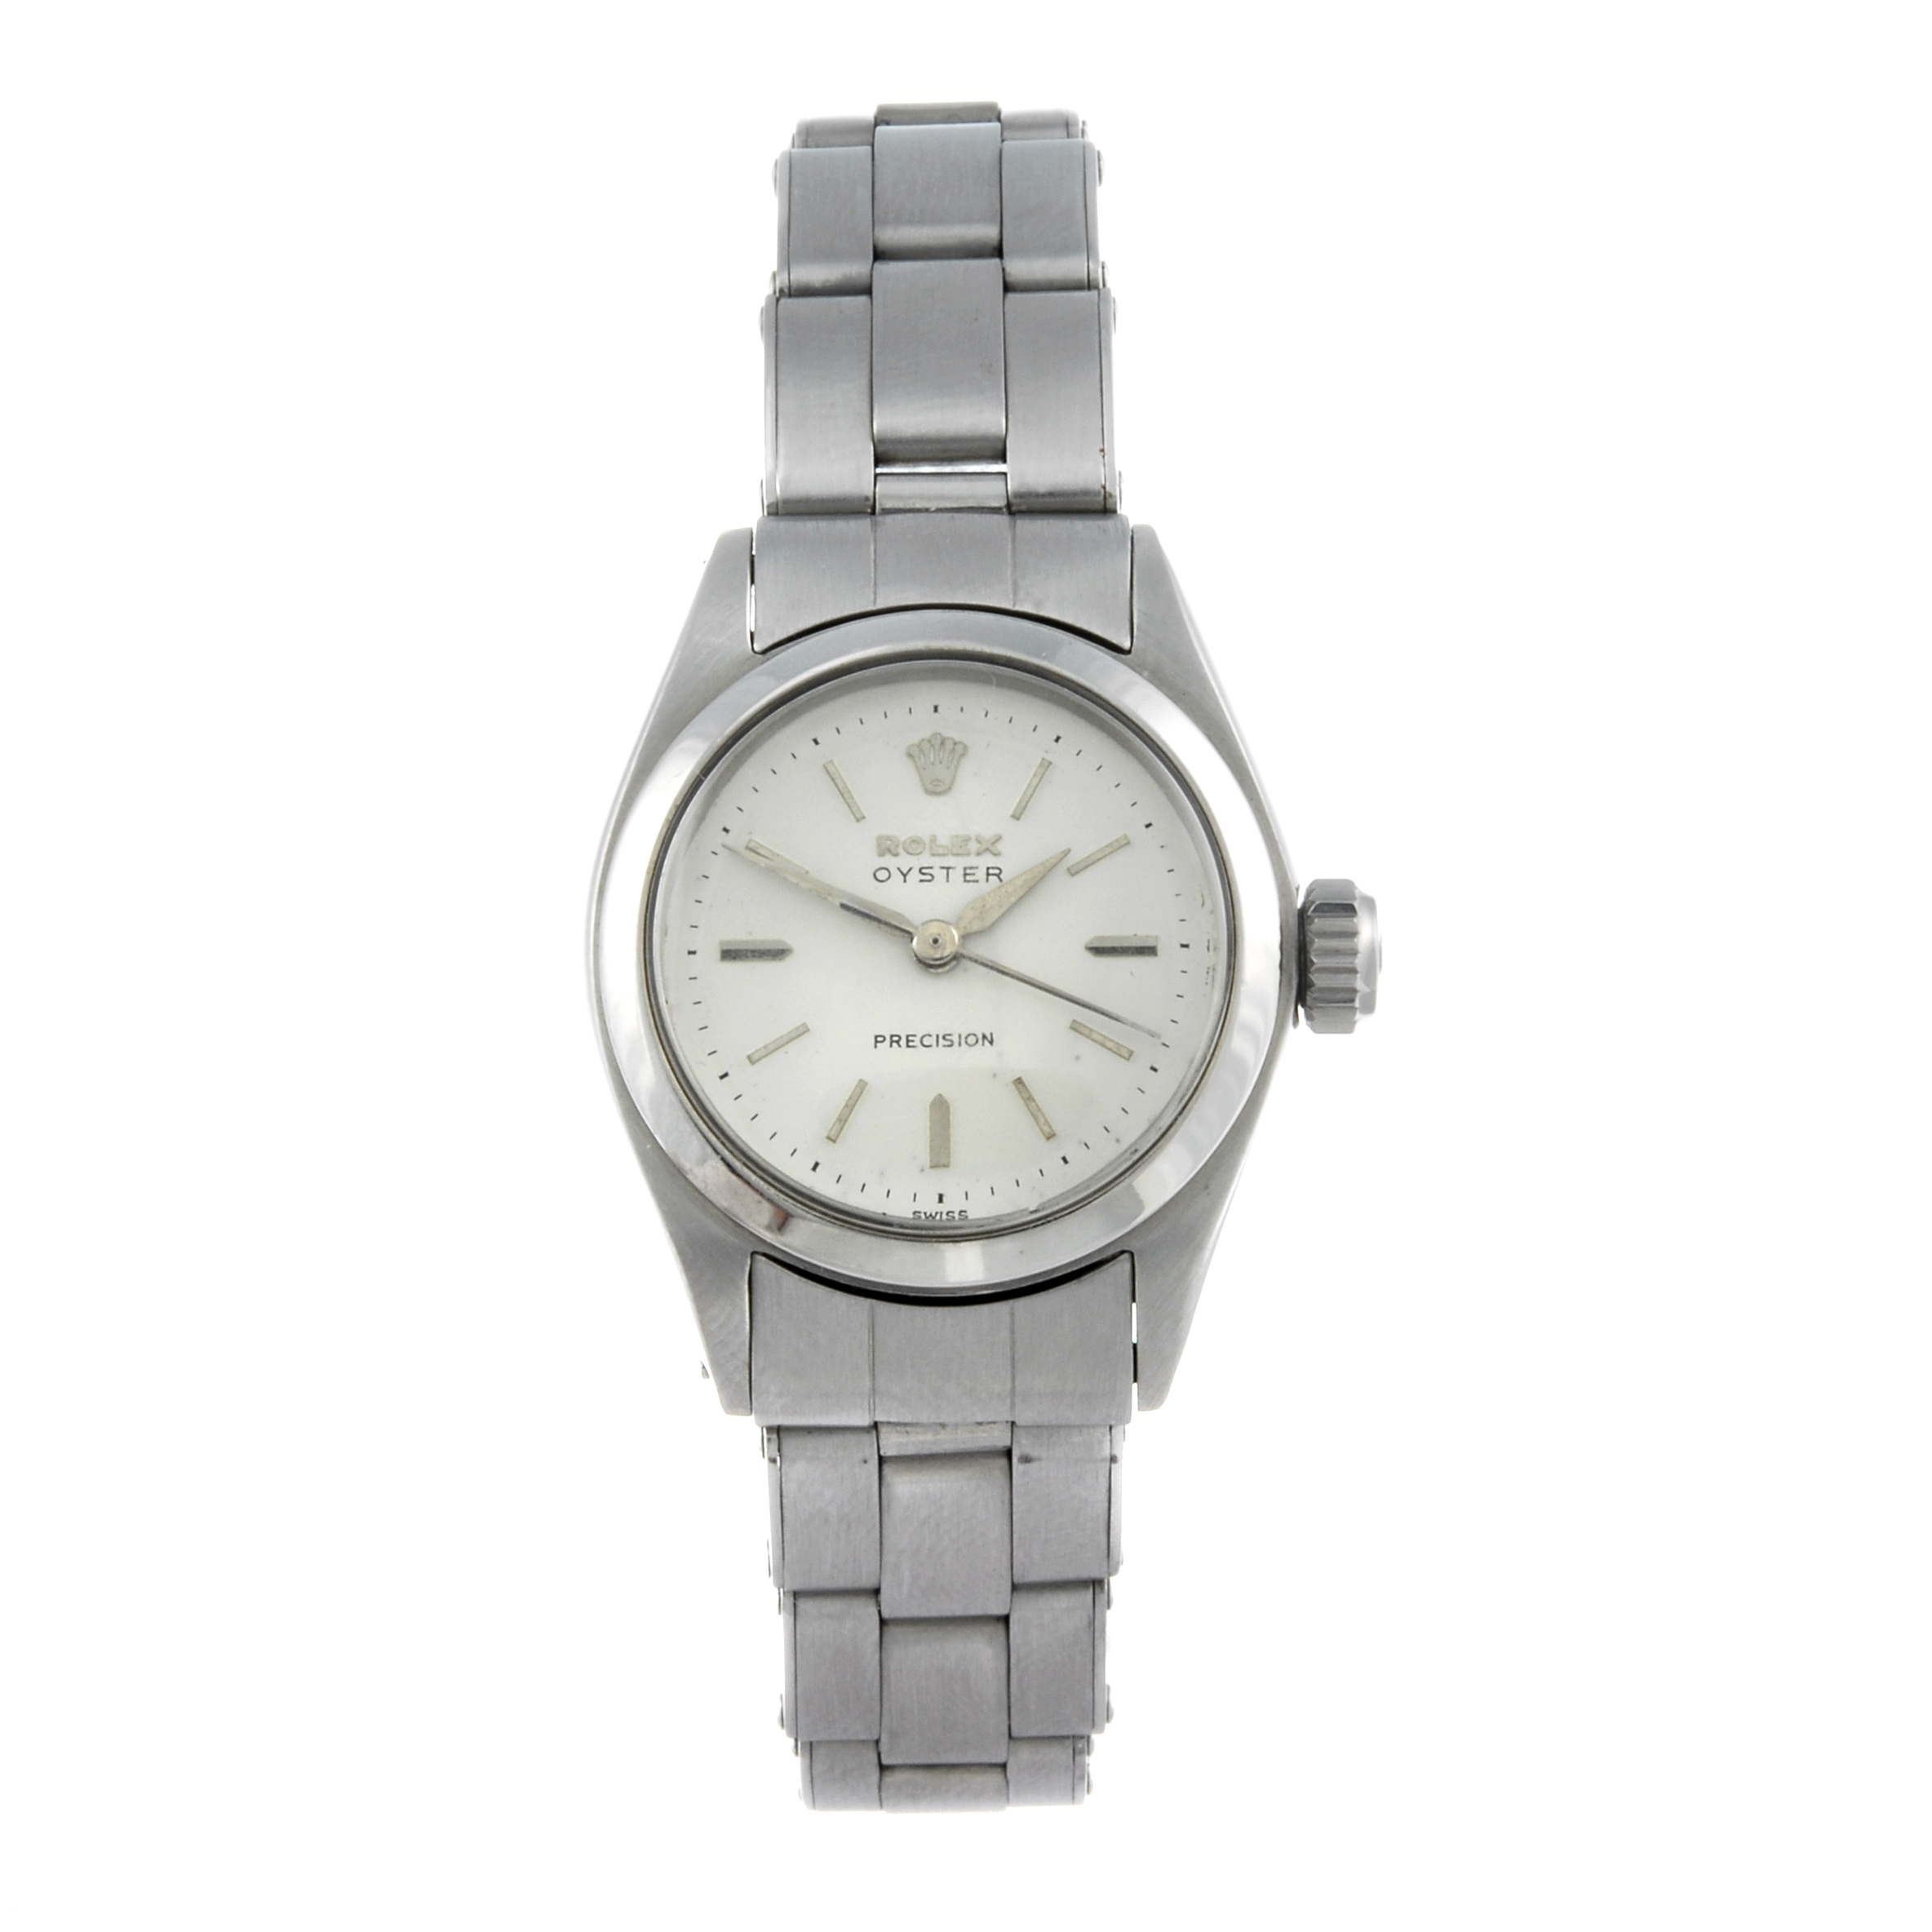 ROLEX - a lady's Oyster Precision bracelet watch. Circa 1952. Stainless steel case. Reference